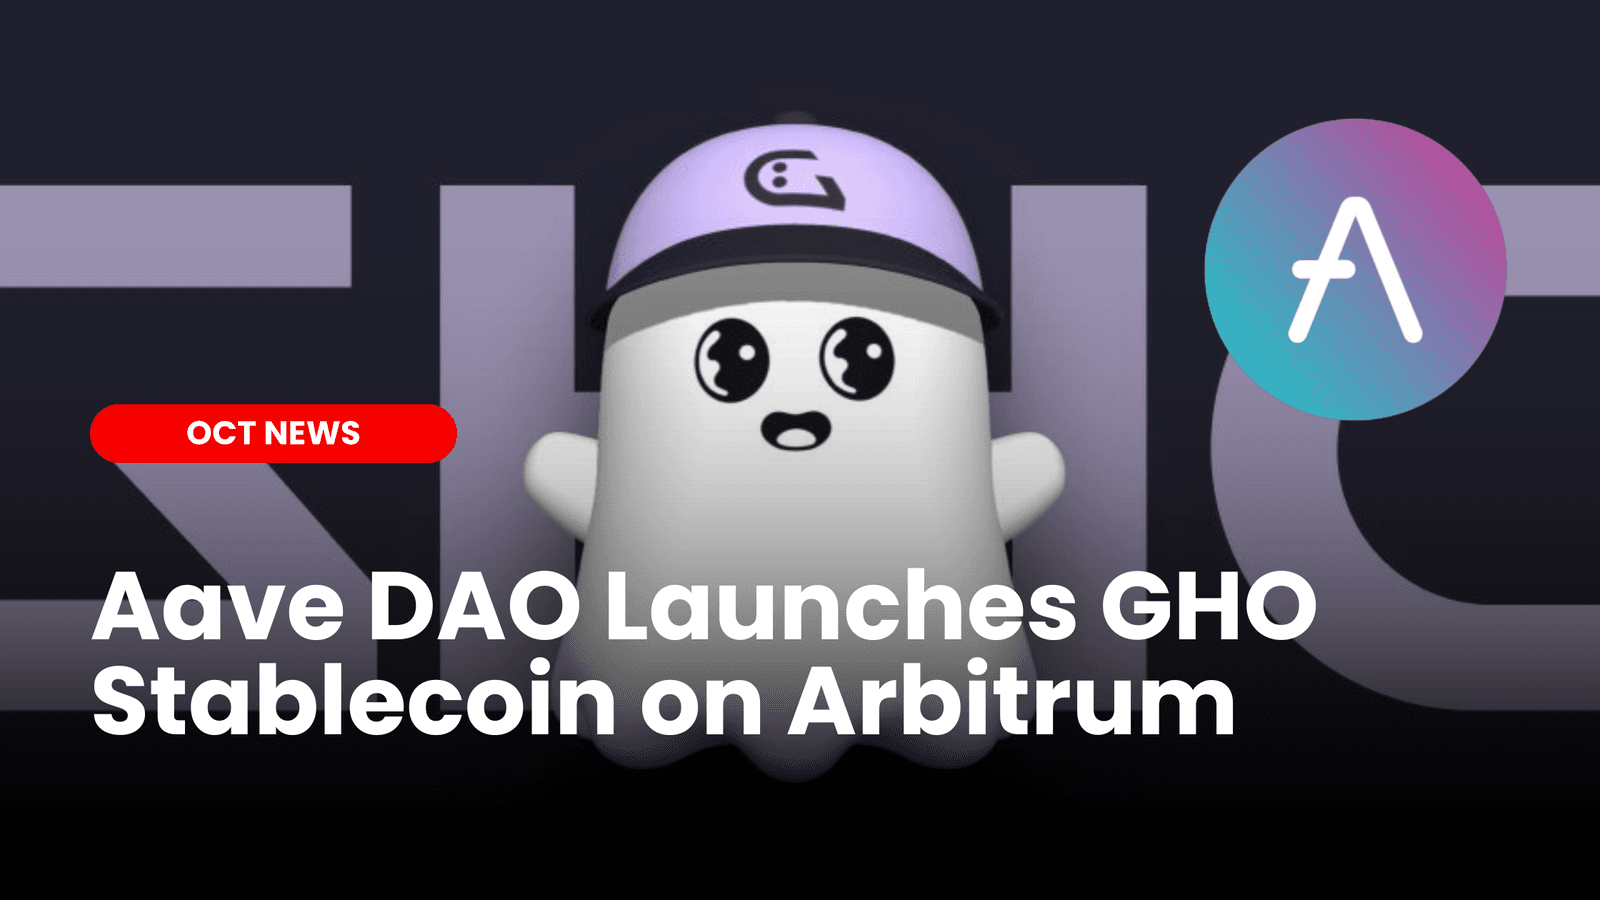 Aave DAO Introduces GHO Stablecoin image